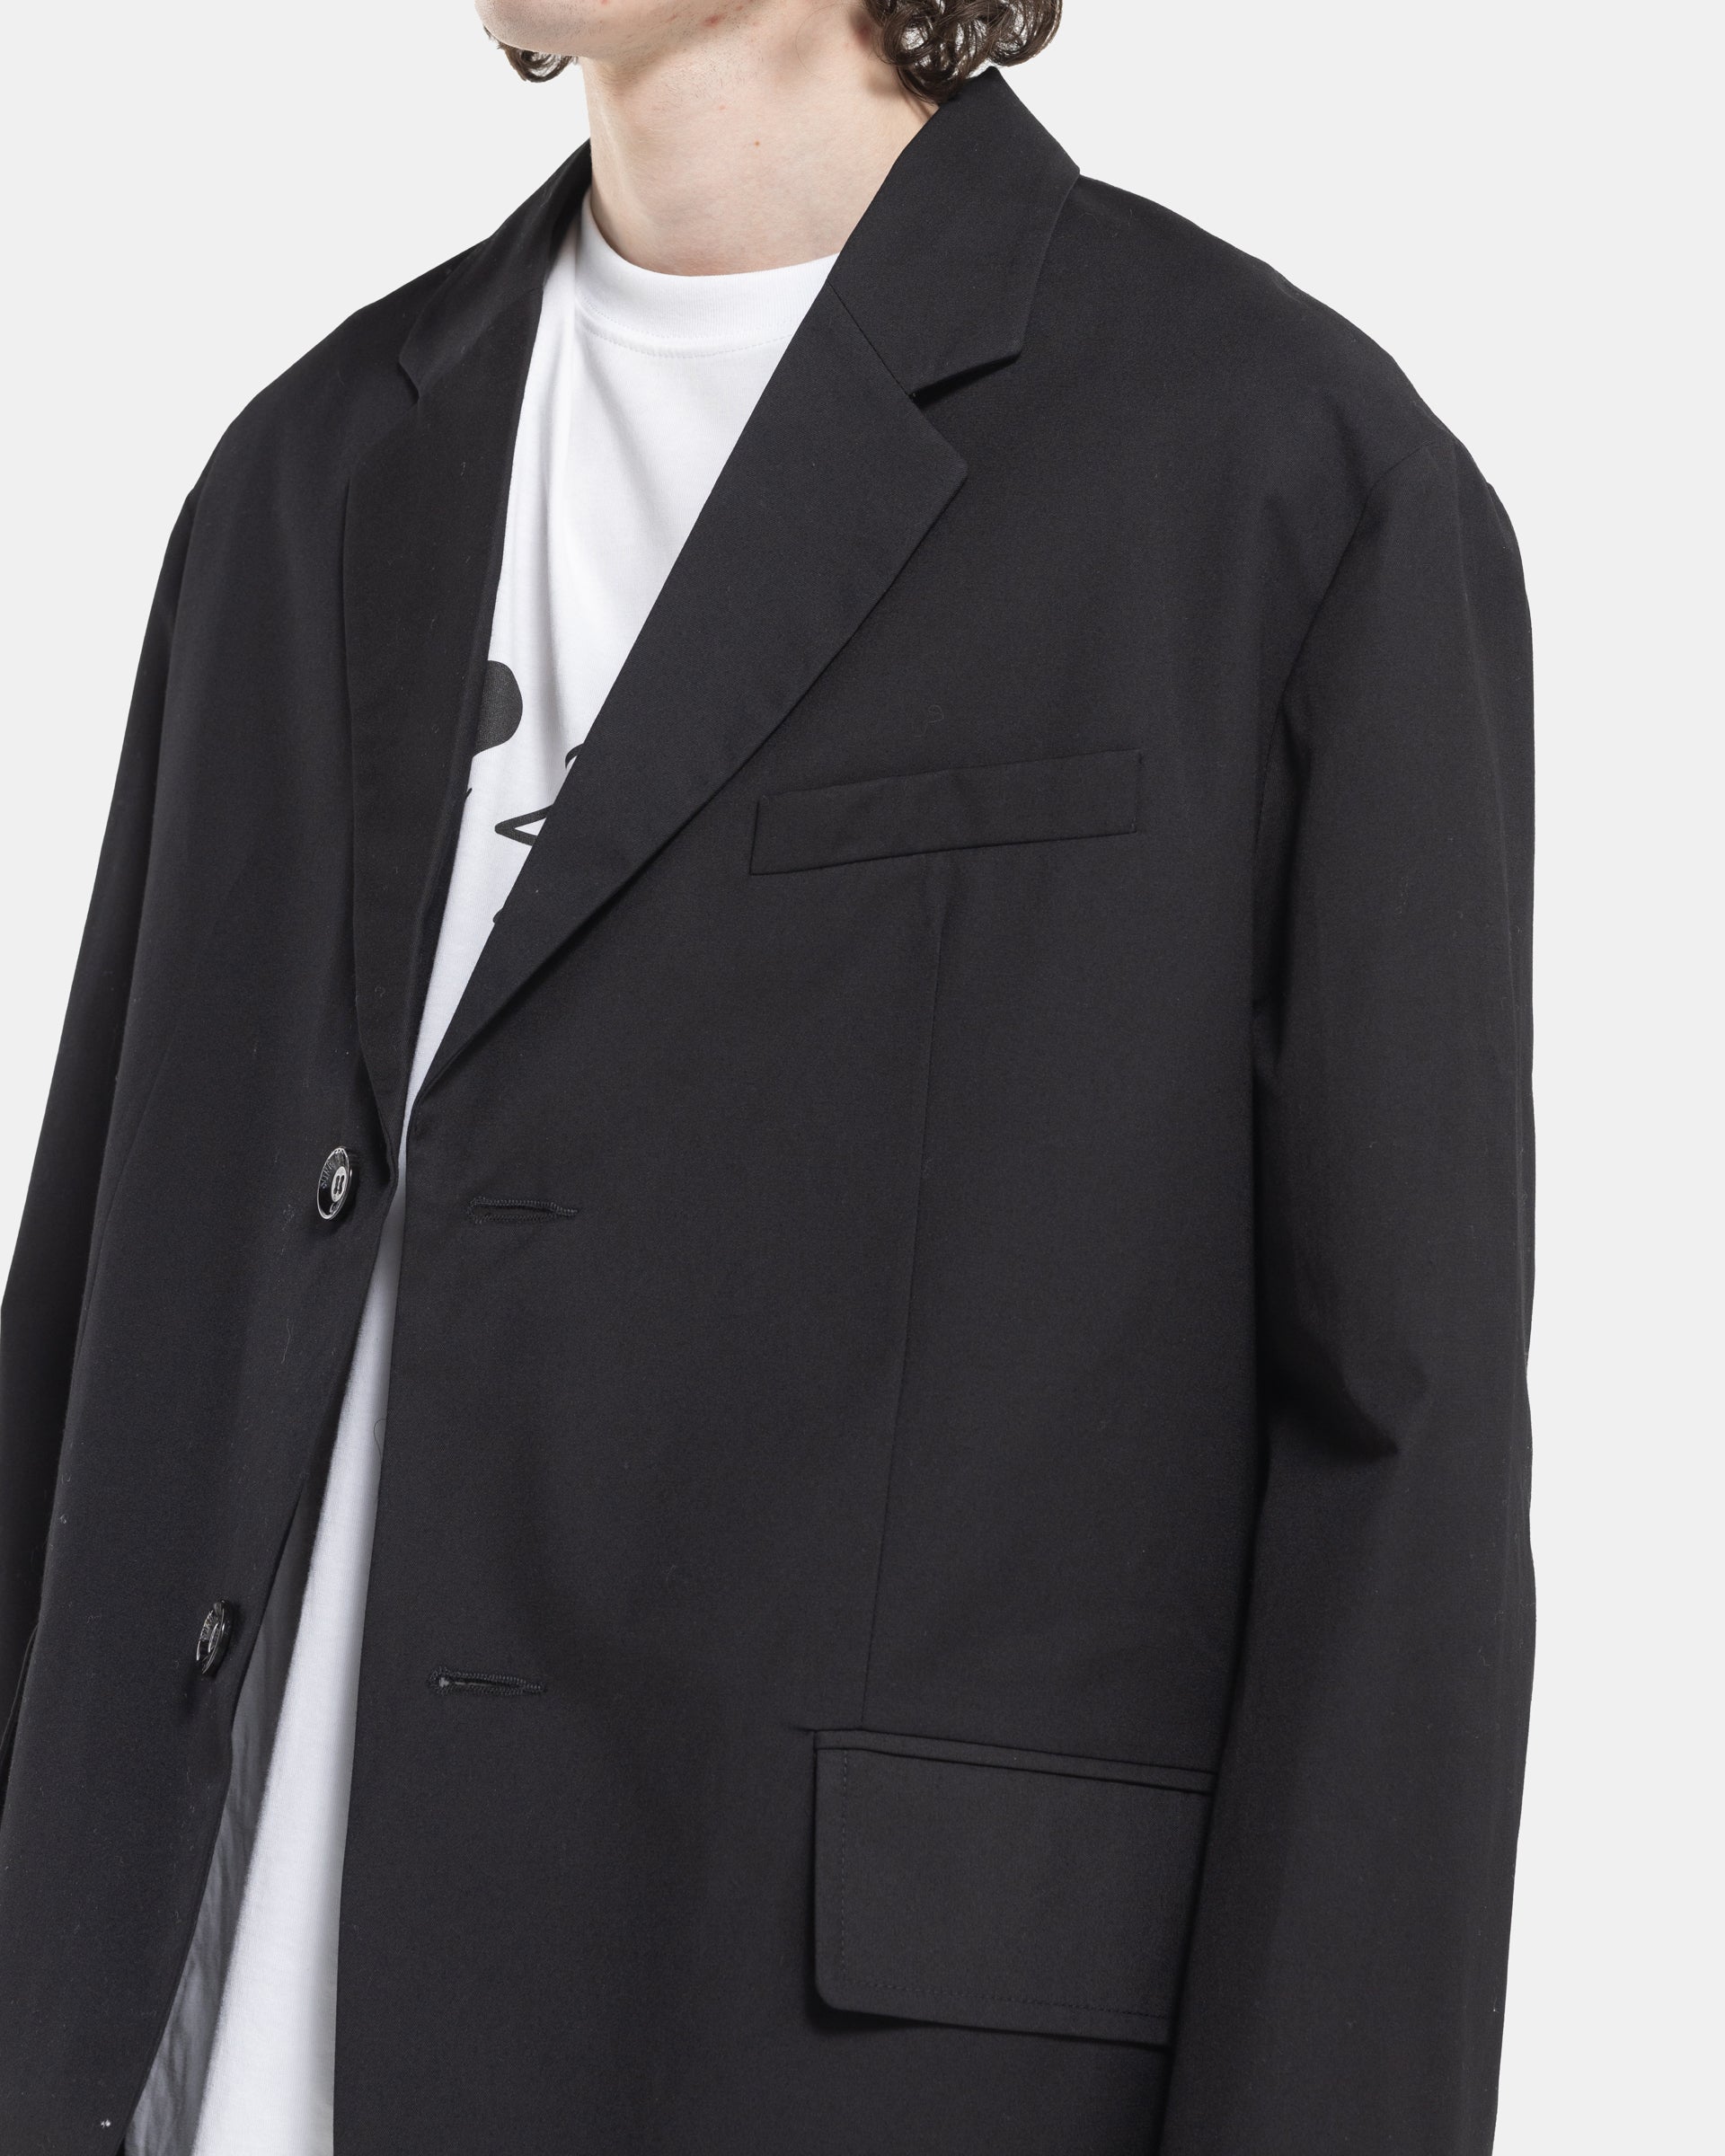 Song For The Mute Square Blazer in Black Pocket